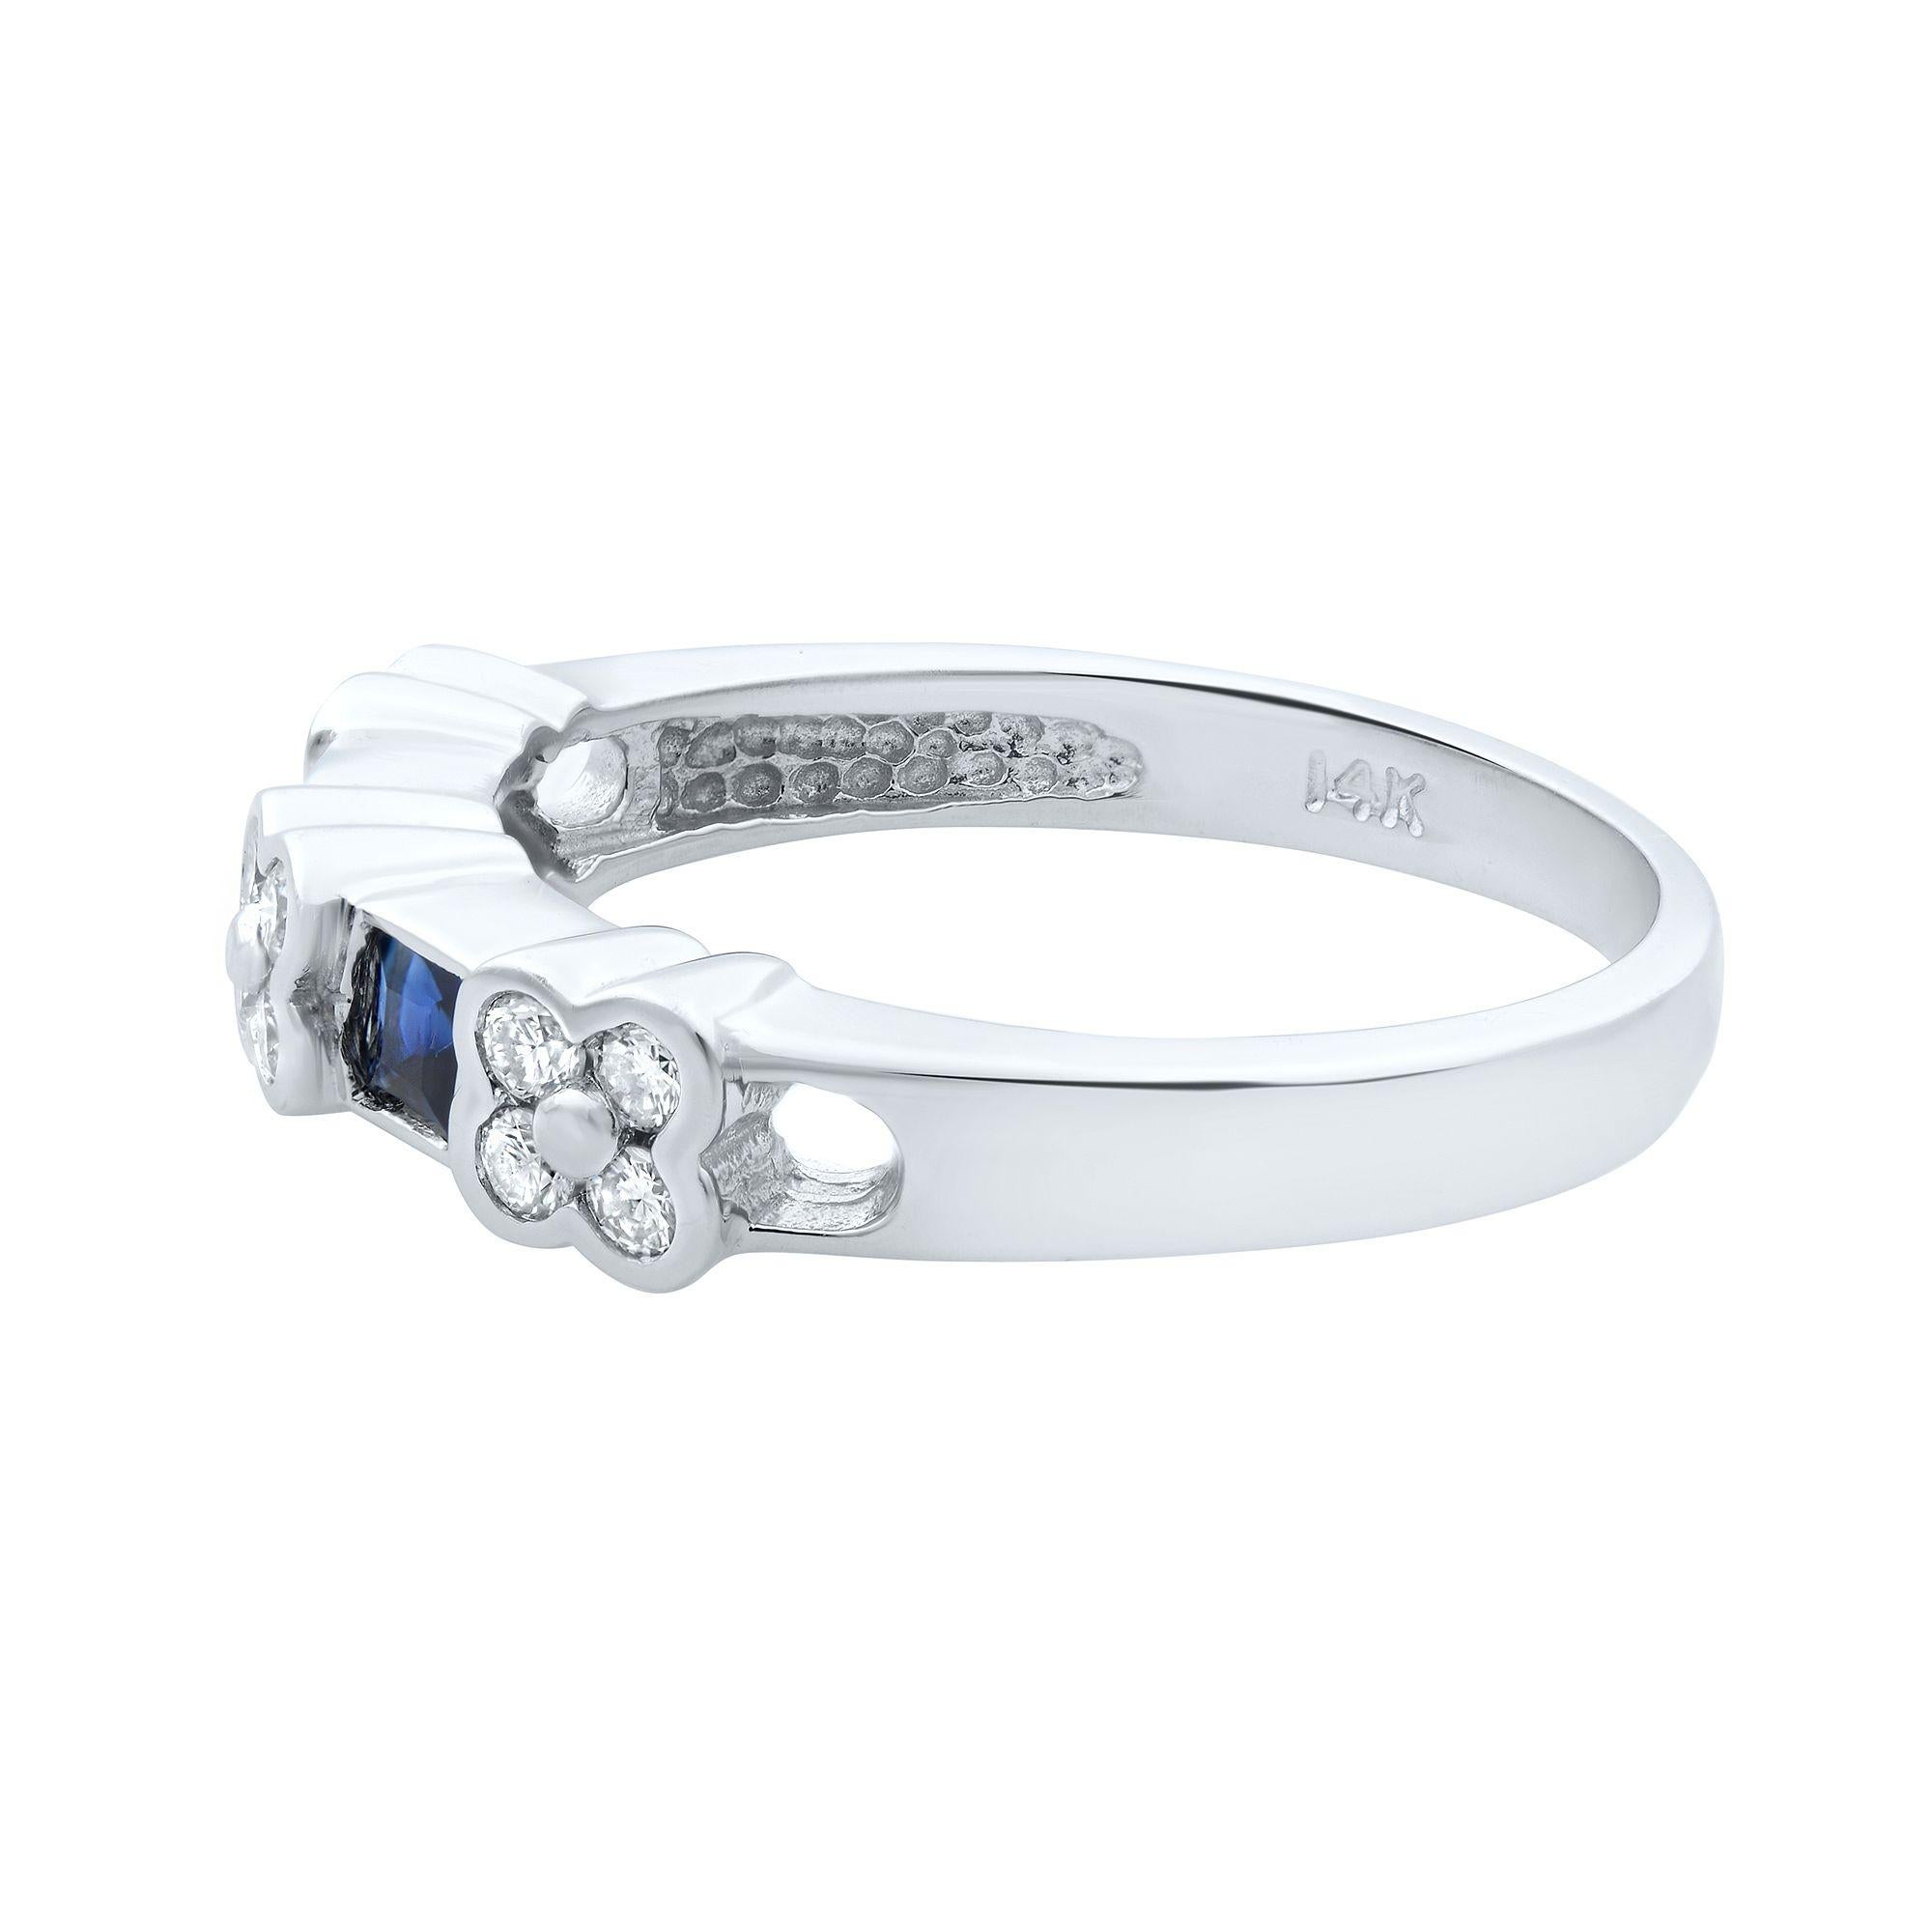 This stunning diamond half eternity band beautifully displays small round cut diamonds with princess cut shaped blue sapphires. Total diamond weight: 0.20ct. Total blue sapphire weight: 0.24ct. The width of the ring is 4.00mm. Total weight: 2.80